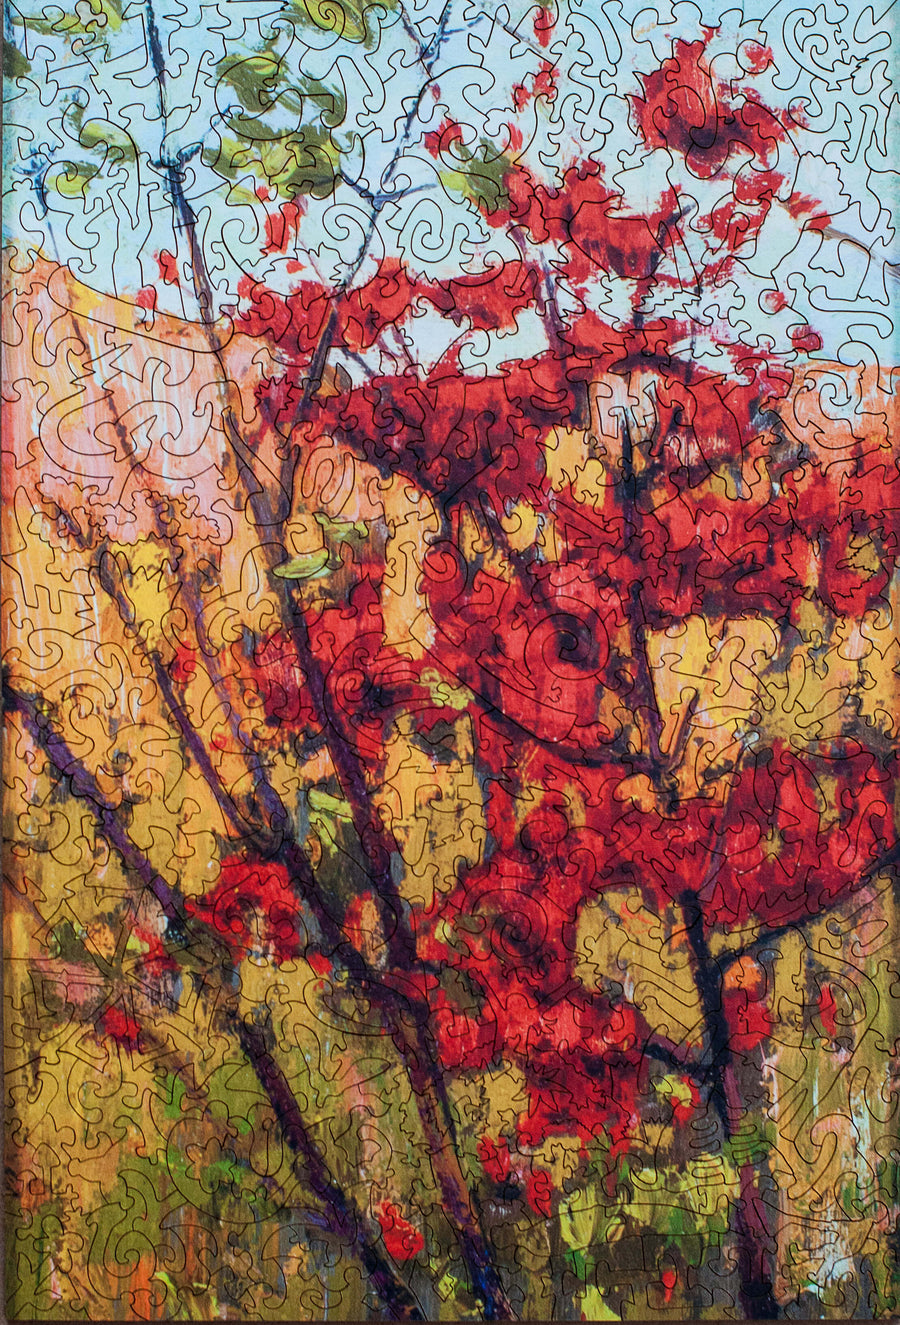 Tom Thomson - Soft Maple in Autumn Jigsaw Puzzle